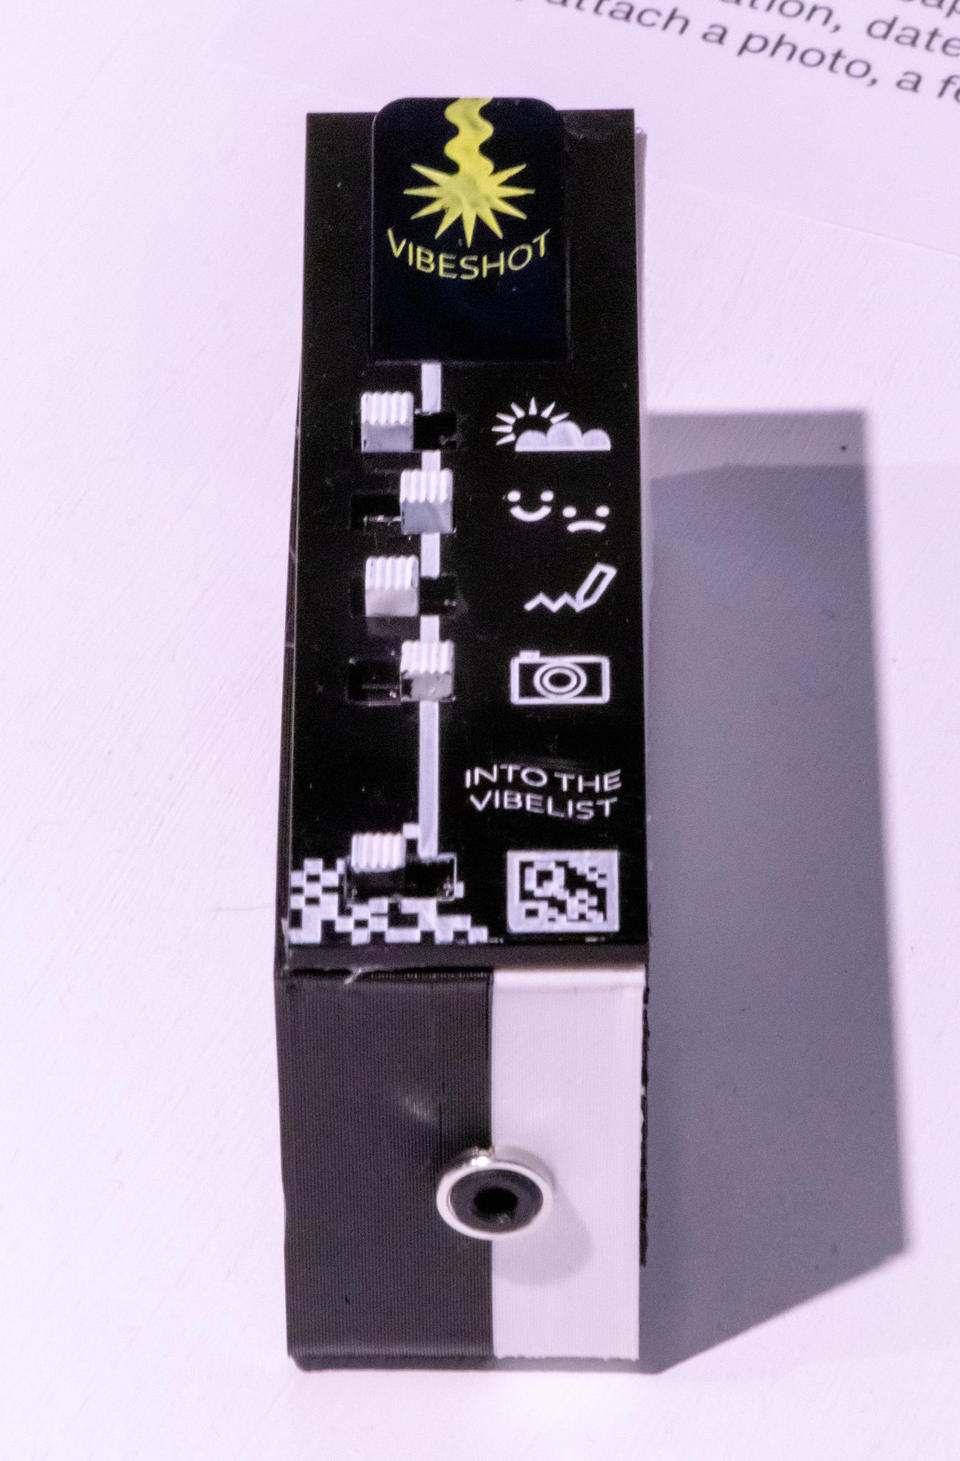 Photograph showing the vibelist and the audio jack (output) on the bottom of the device.